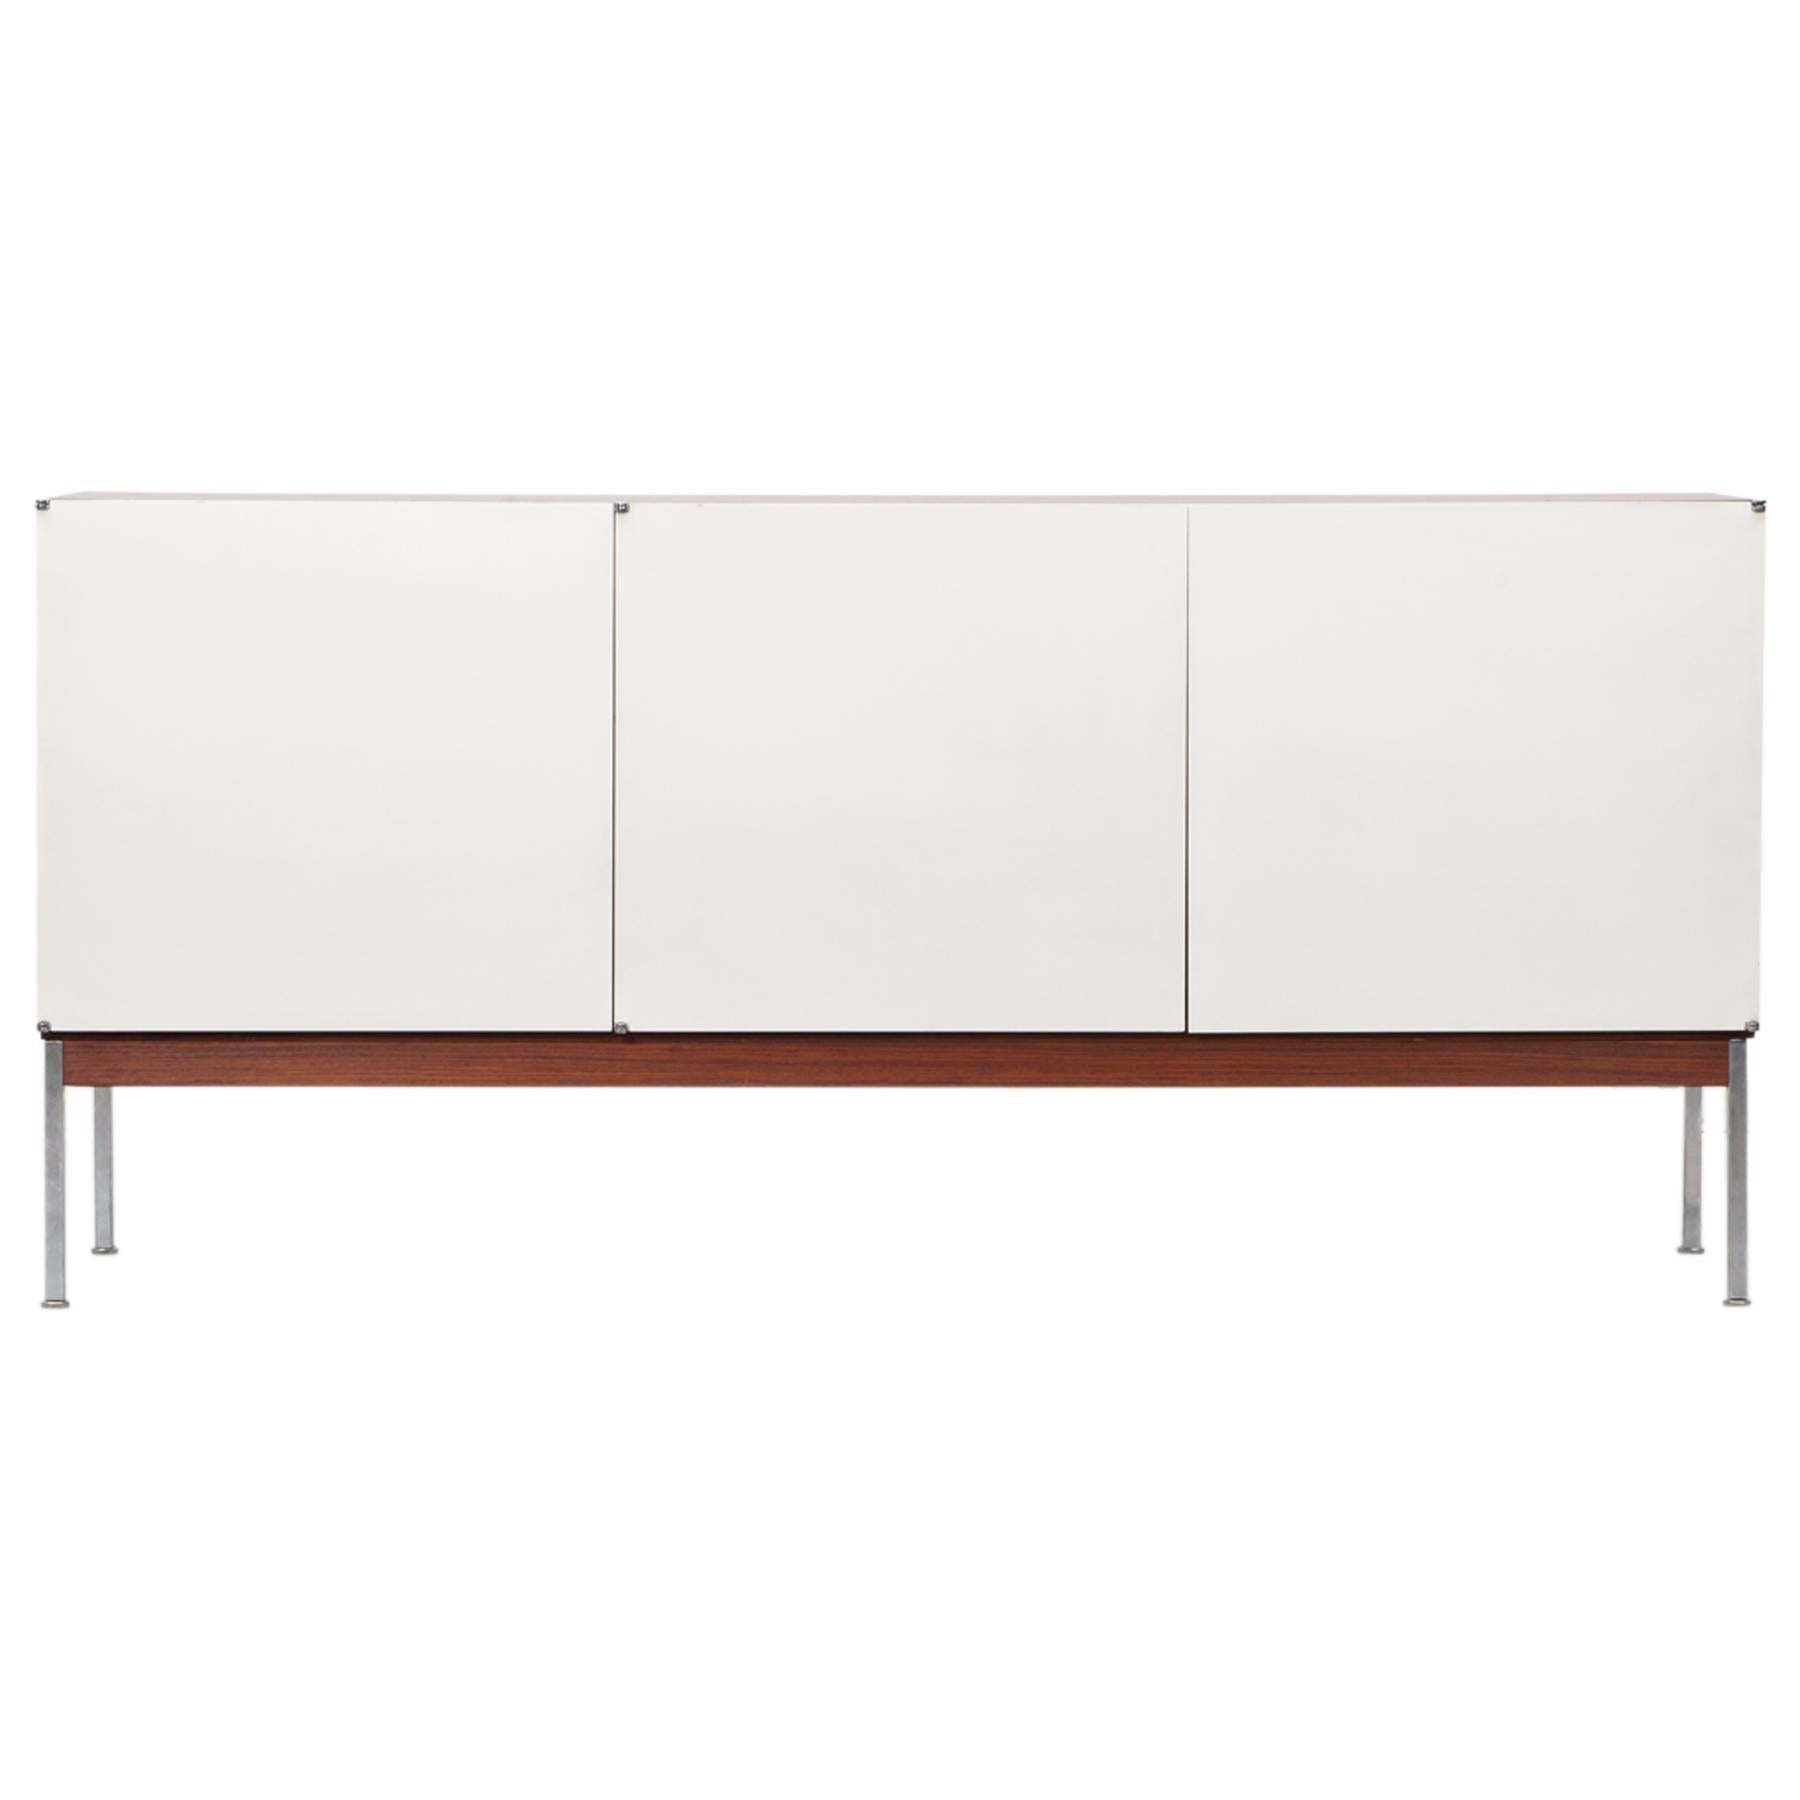 Antoine Philippon and Jacqueline Lecoq Sideboard